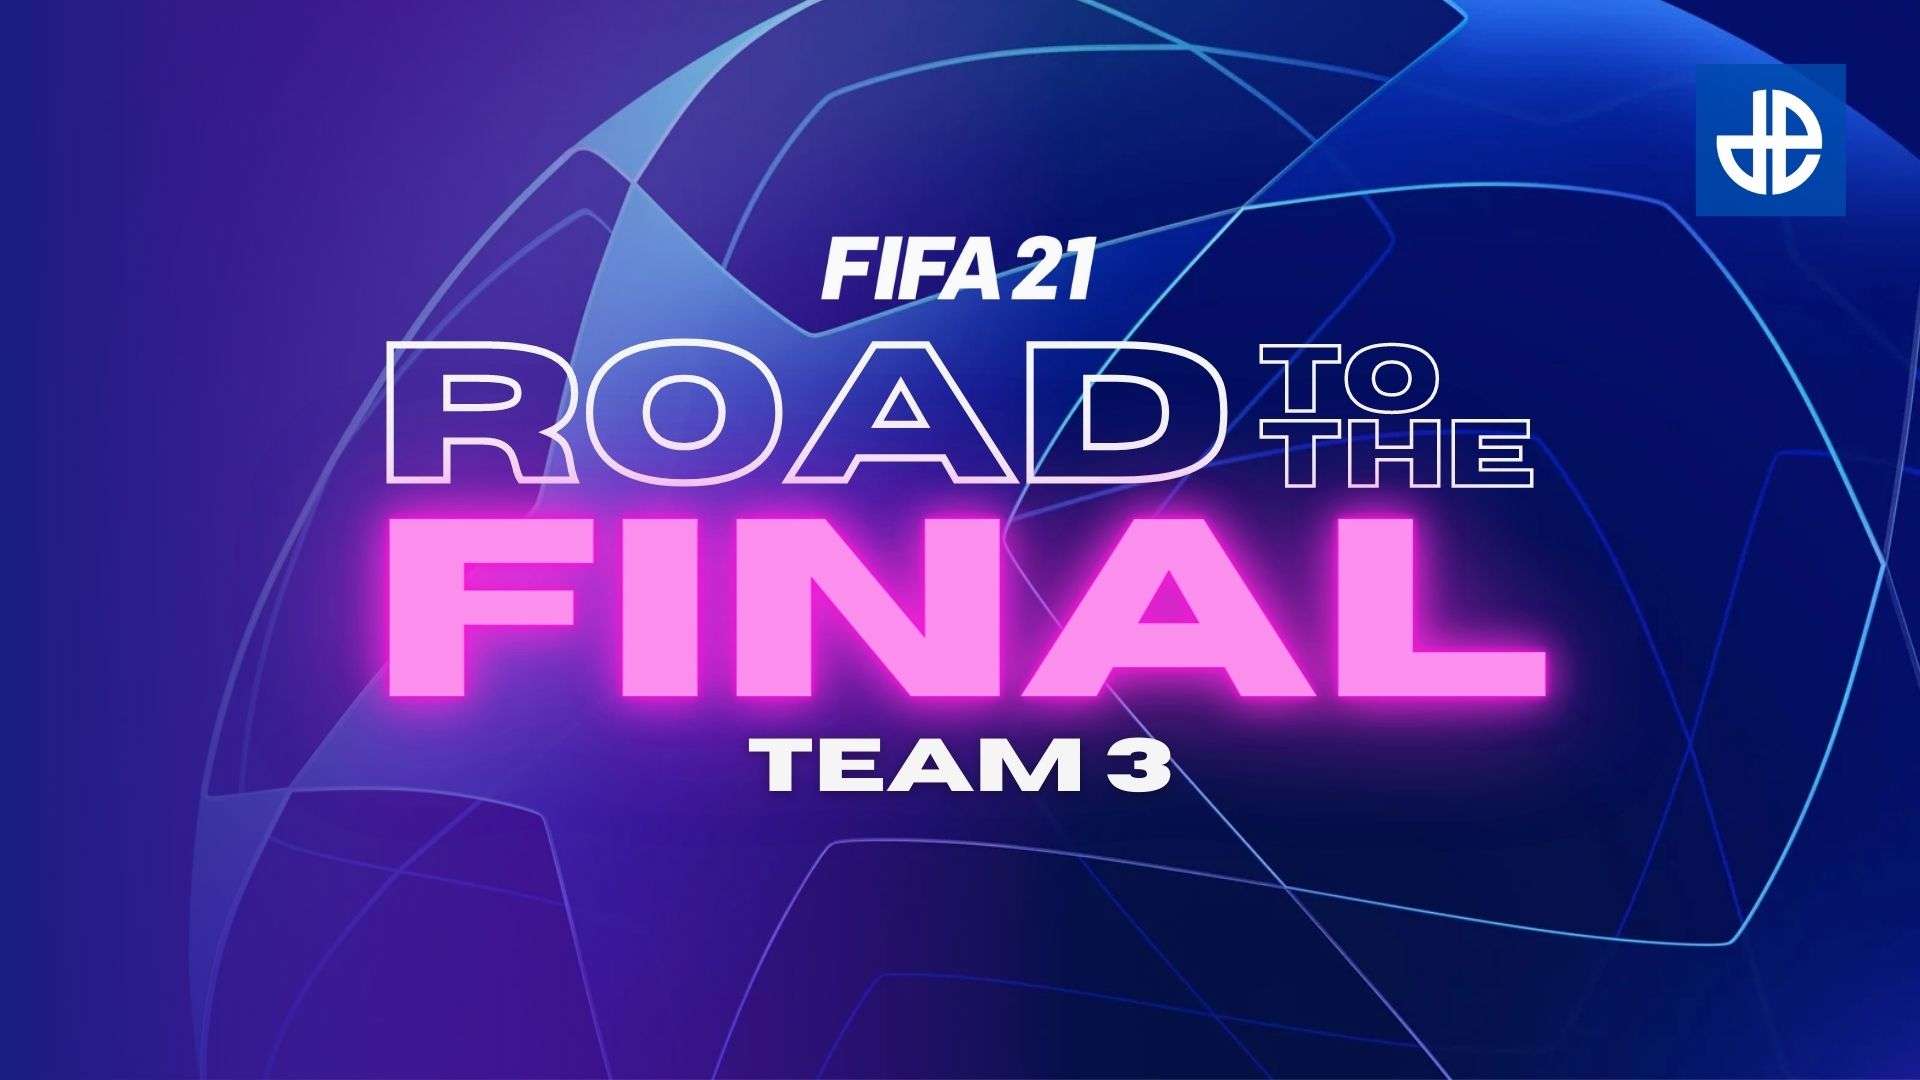 FIFA 21 Road to the Final Team 3 text on Champions League logo.